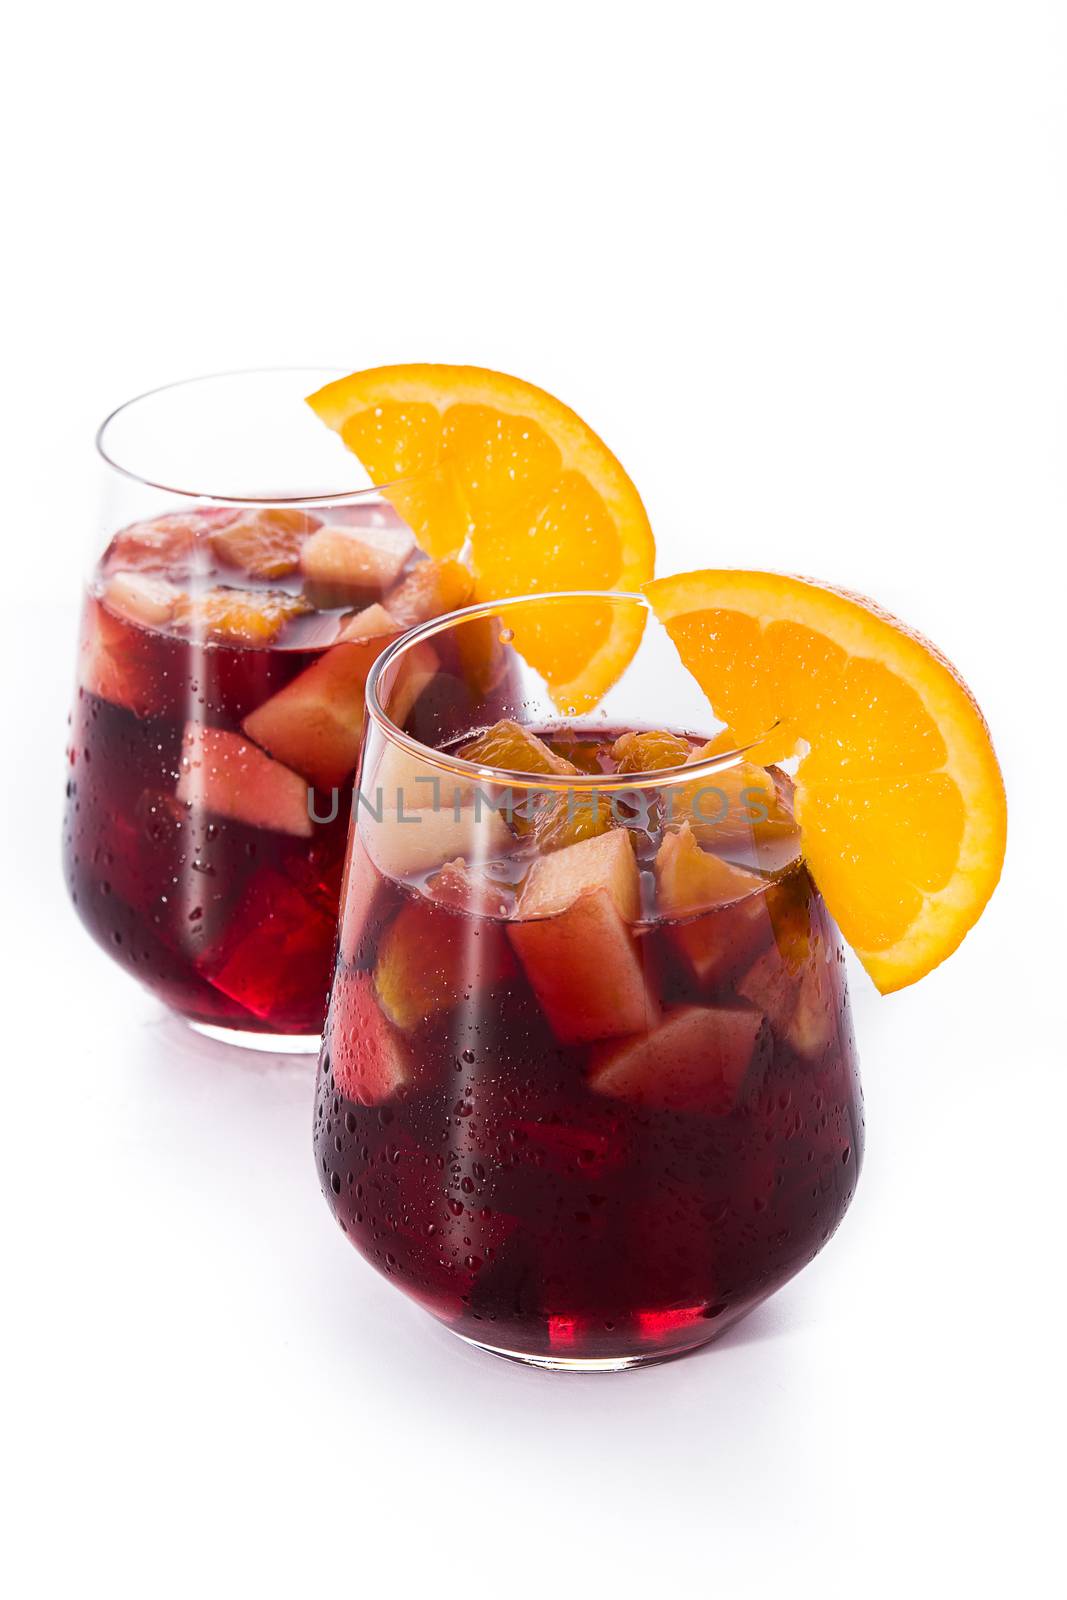 Red wine sangria in glass isolated on white background by chandlervid85